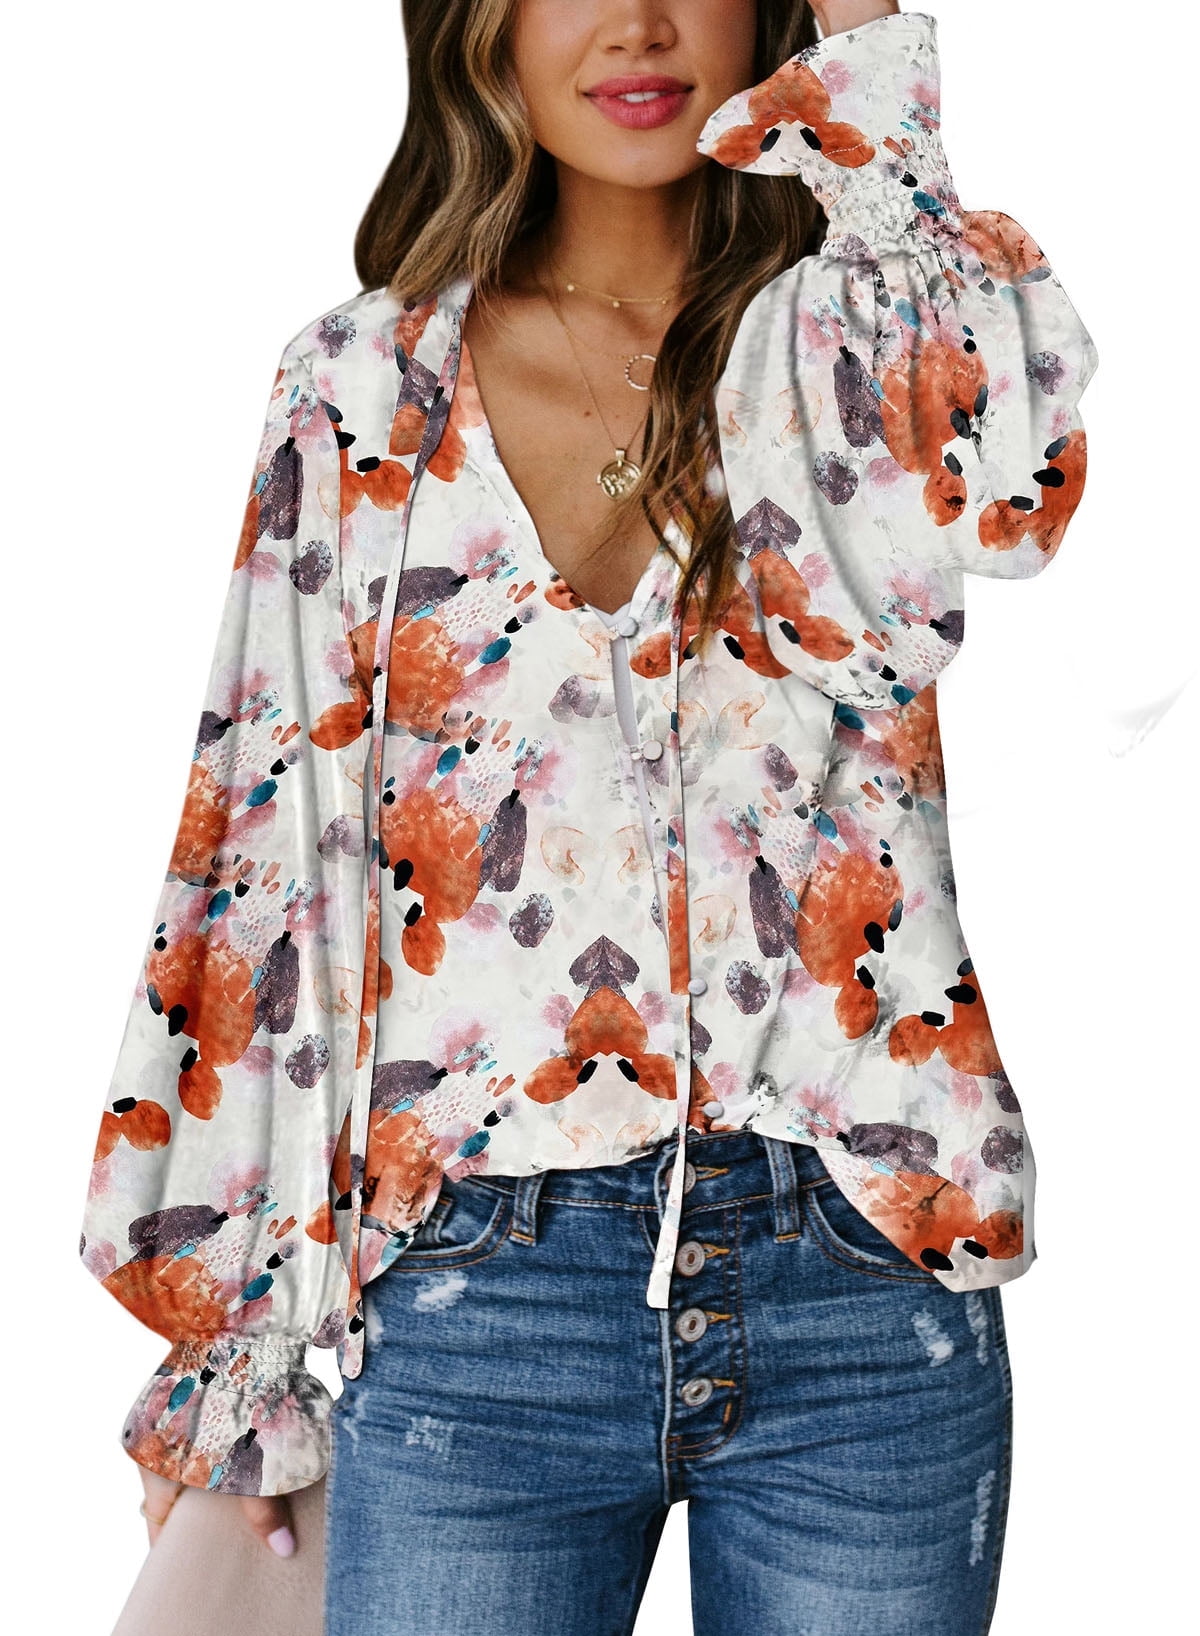 EVALESS Womens Boho Tops Casual V Neck Floral Print Button Blouses